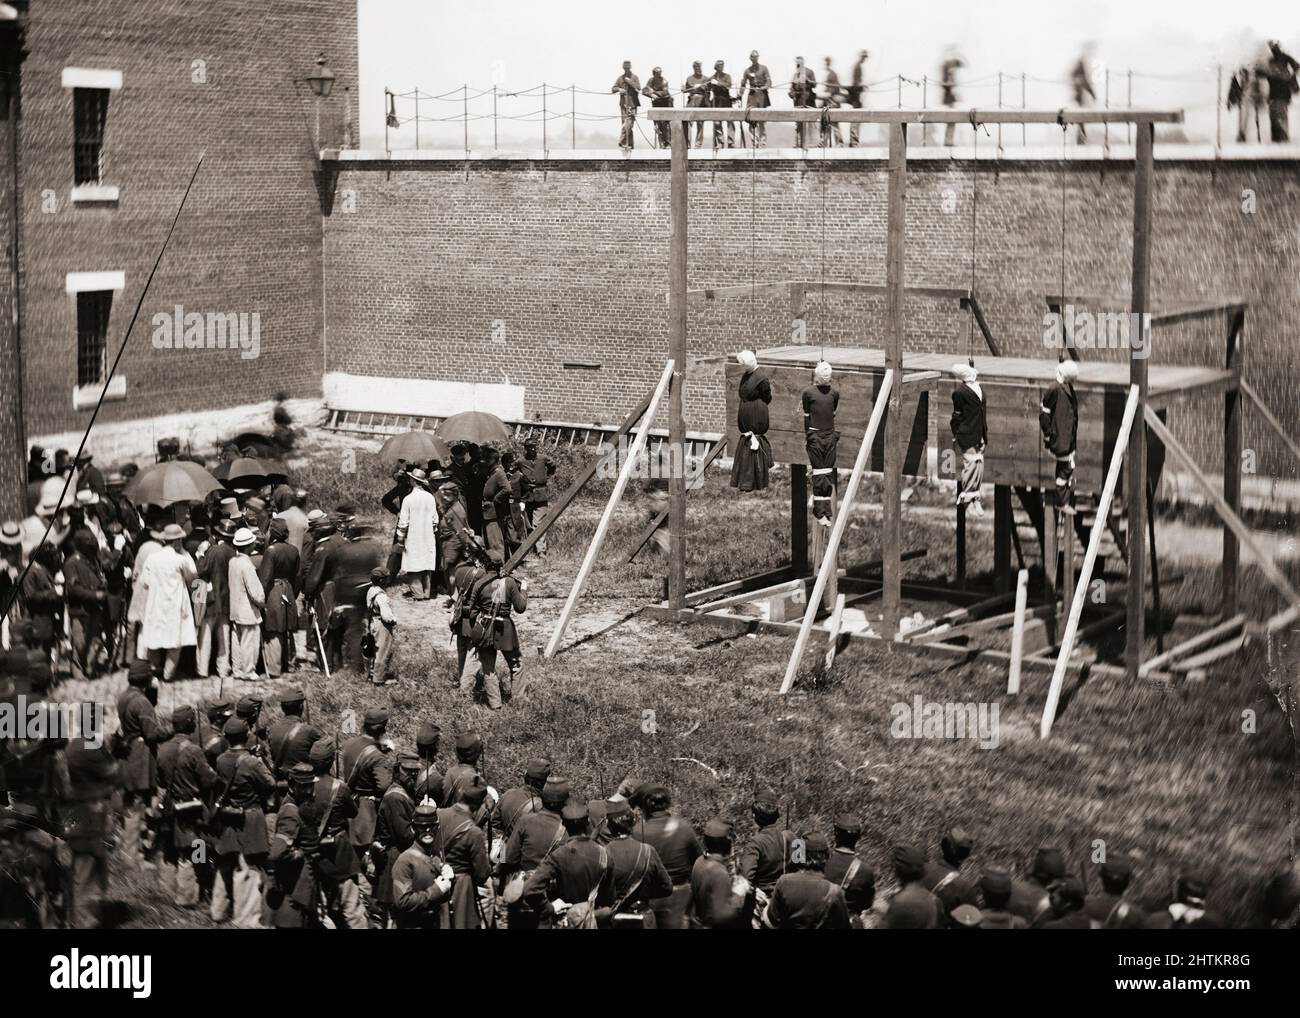 Mary Surratt, Lewis Powell, David Herold, and George Atzerodt hanging from the gallows at Fort McNair, Washington D.C., July 7, 1865.  They had been convicted of being part of the conspiracy which resulted in the assassination of President Abraham Lincoln by John Wilkes Booth on April 14, 1865. Stock Photo